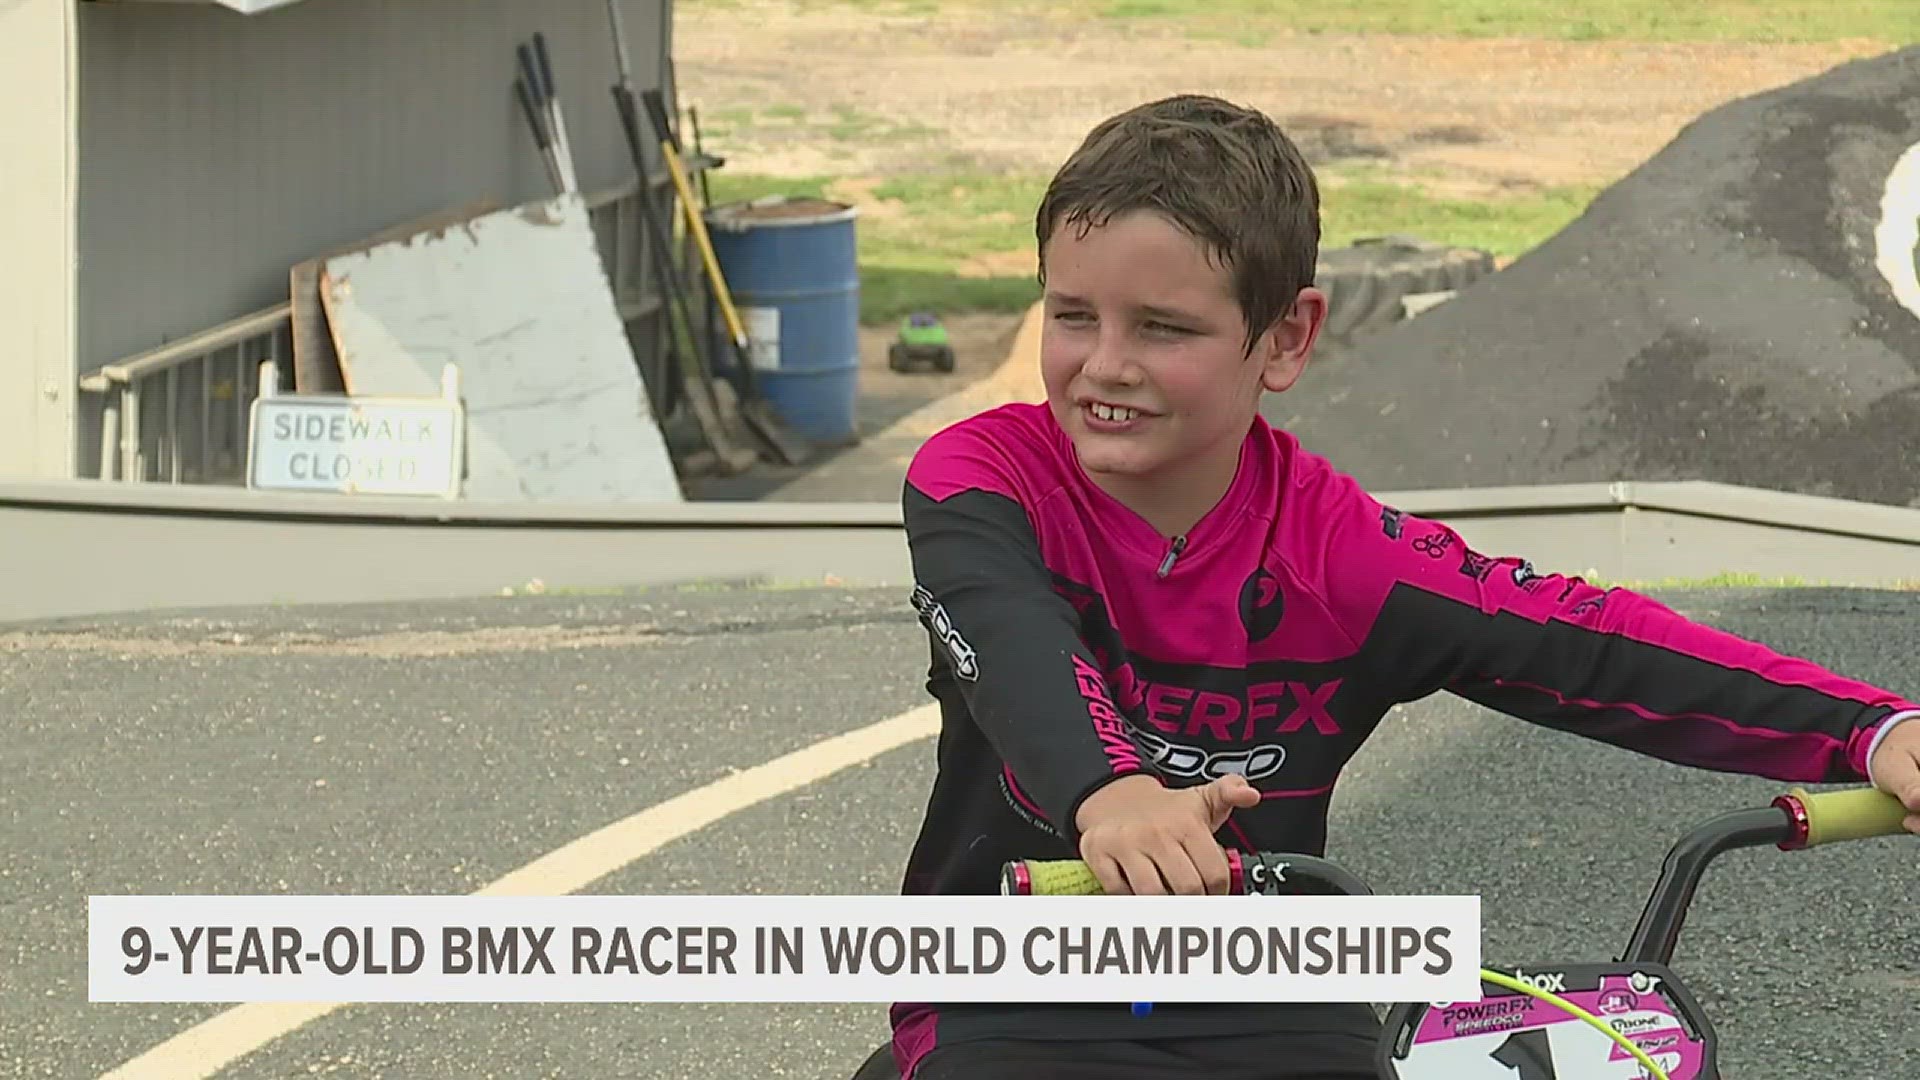 Knox Reaves is facing off against 76 other bikers from across the globe at the UCI Cycling World Championships in Scotland.